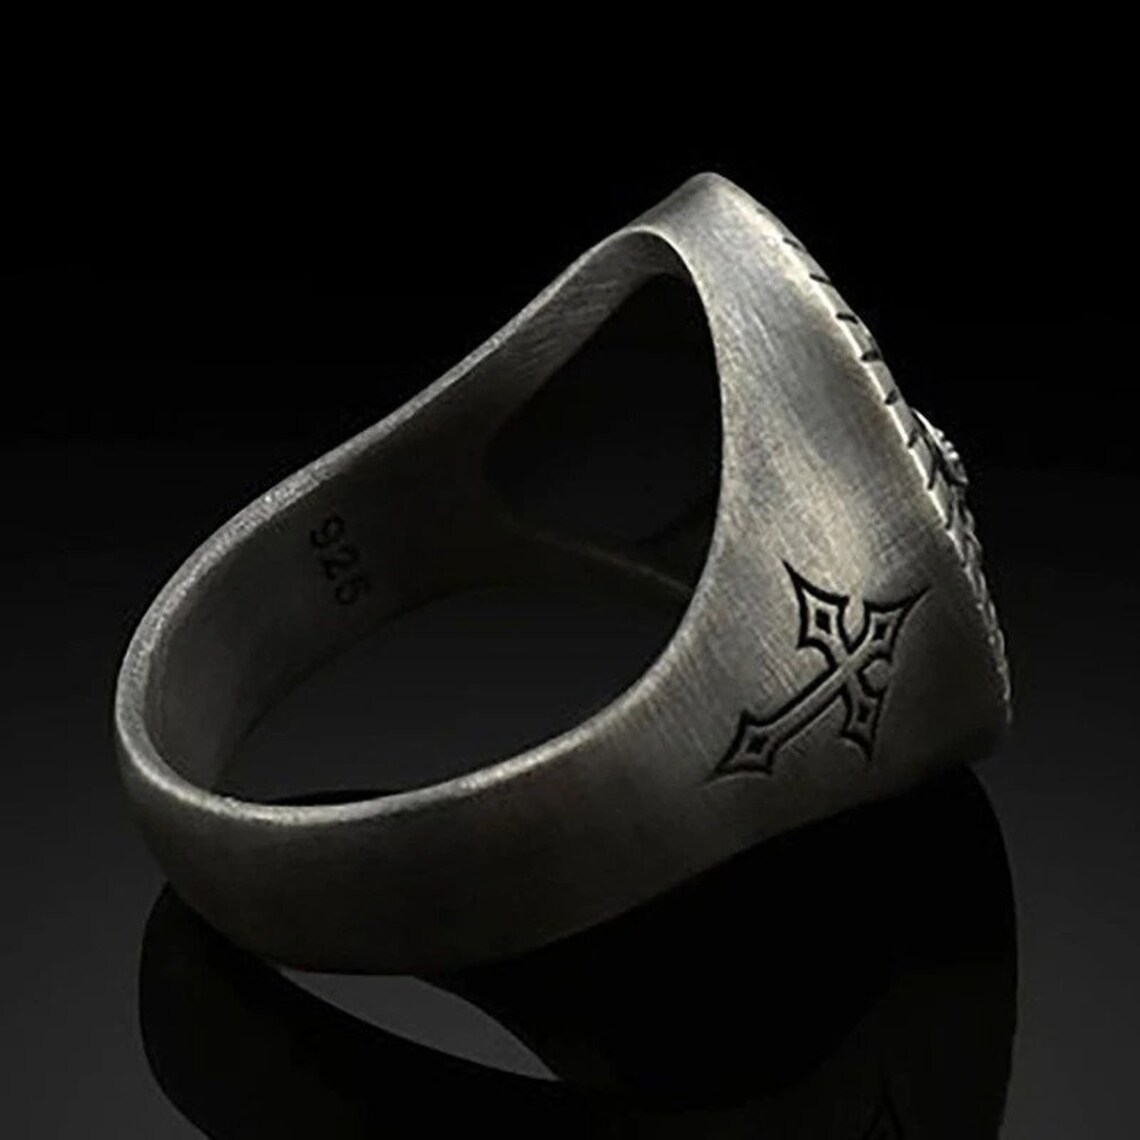 Antique Silver Cross Ring for Men and Women is a Famous Modern - Etsy